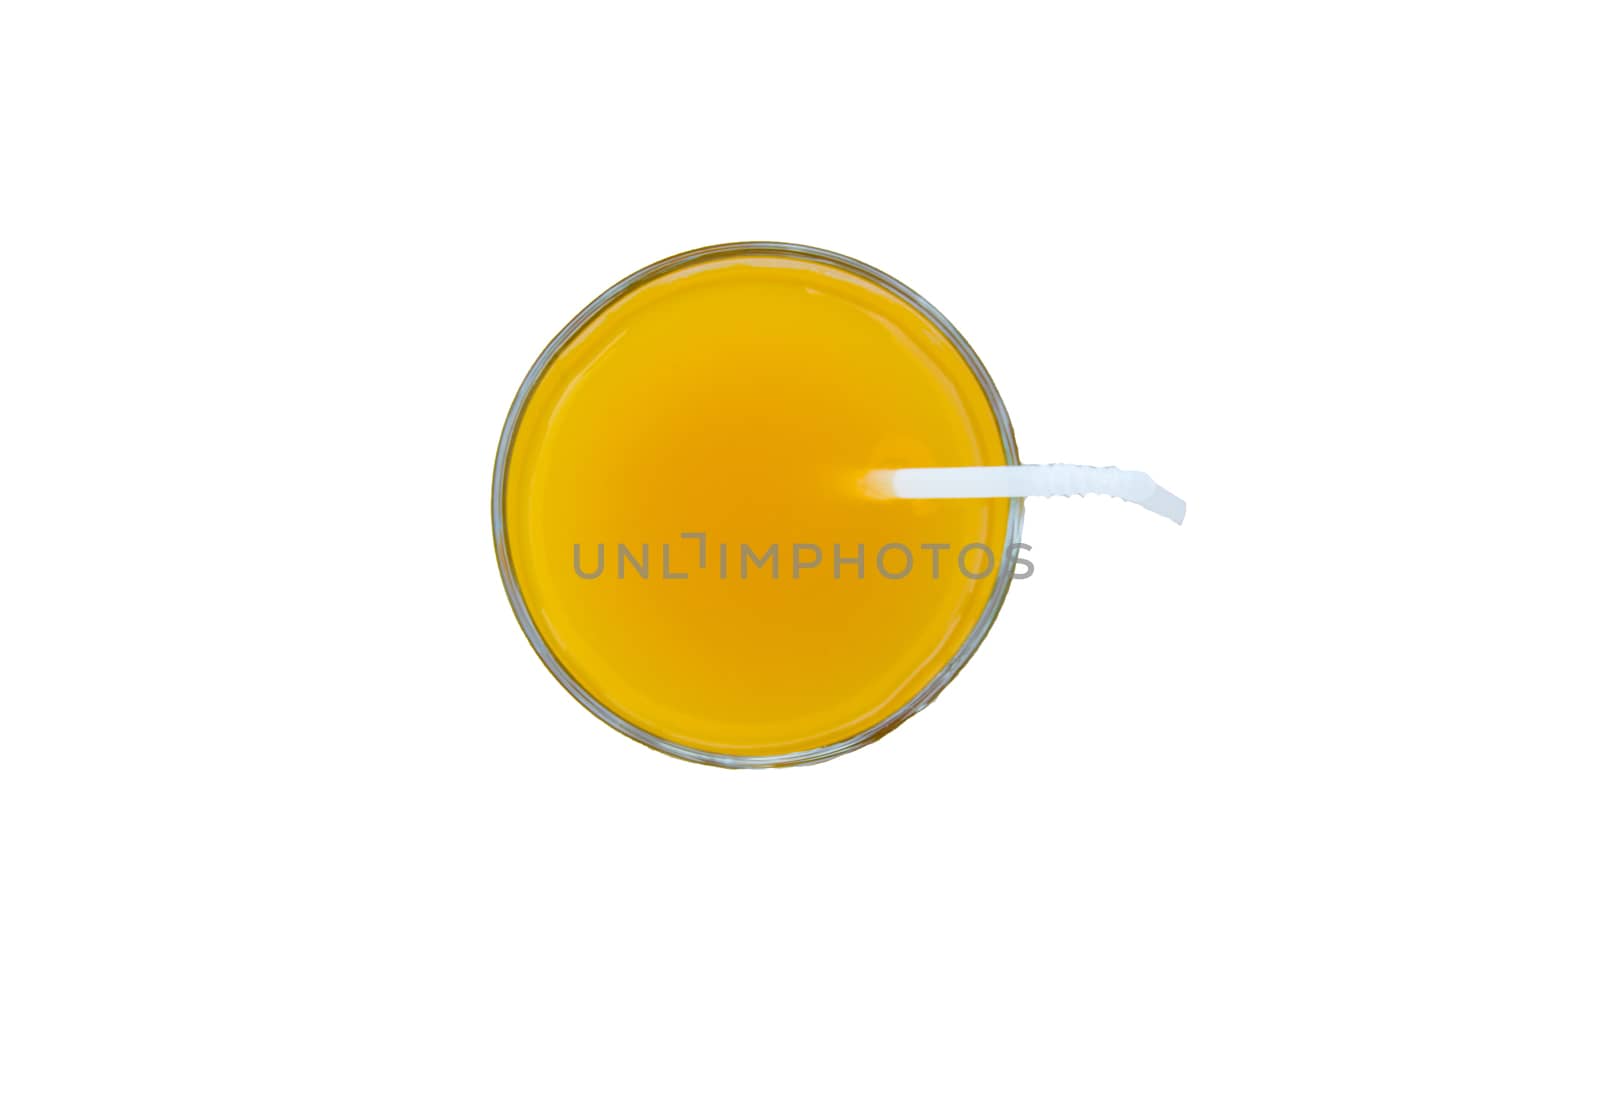 Summer drink - freshly squeezed orange juice in a glass with a straw tube, top view, isolated on a white background with clipping, minimalism style by claire_lucia